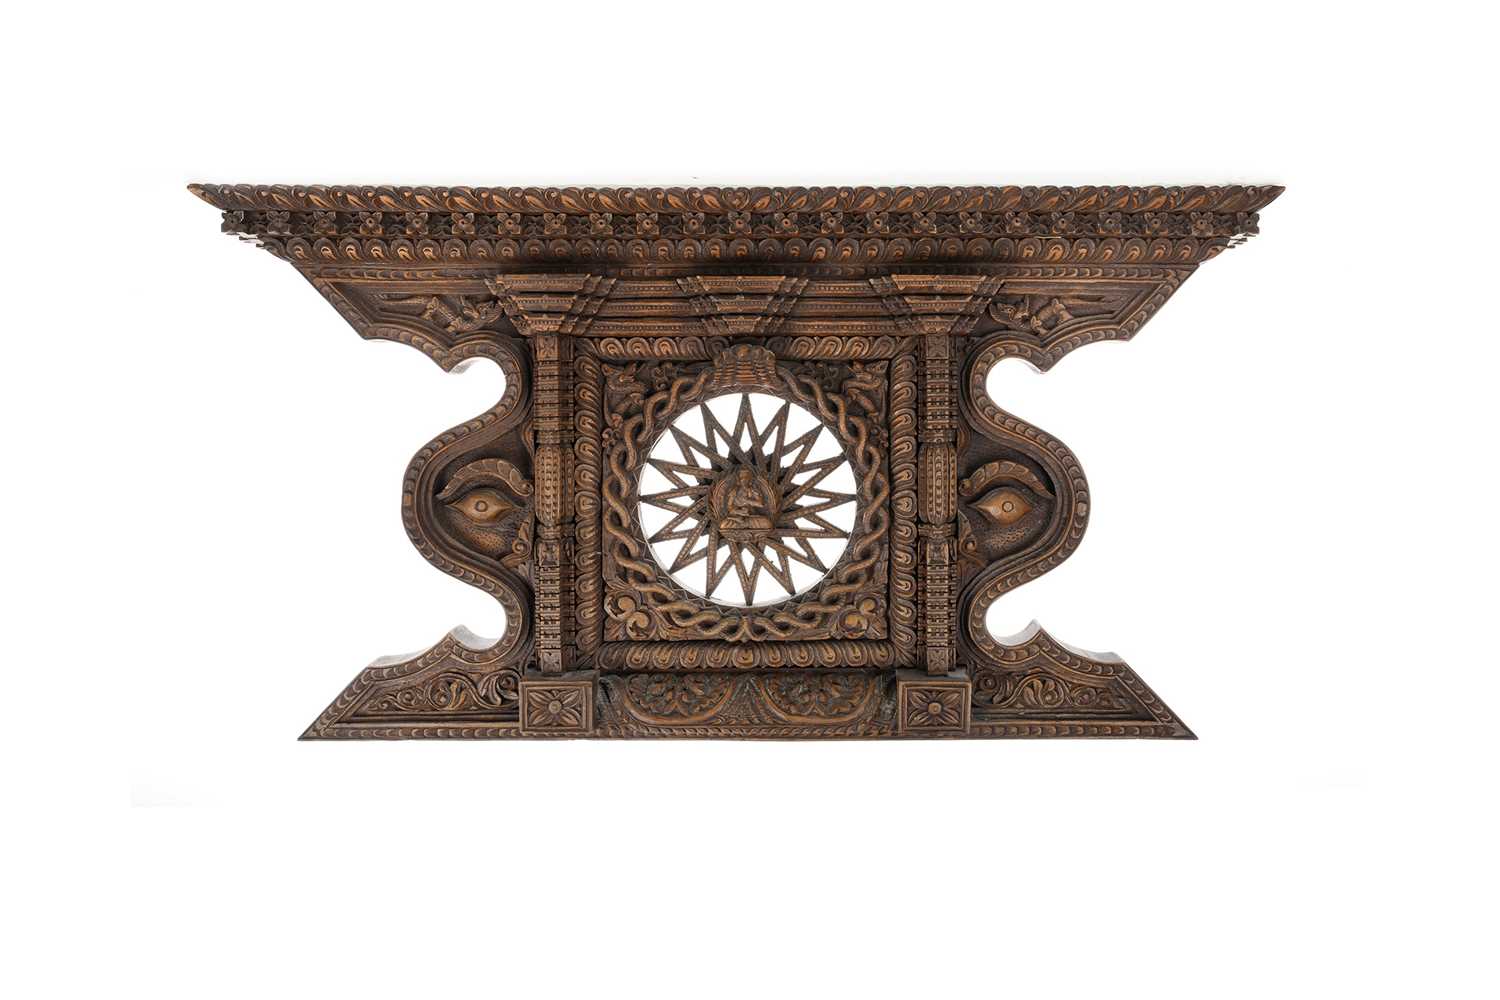 NEPALESE BUDDHIST CARVED HARDWOOD PEDIMENT, EARLY-MID 20TH CENTURY